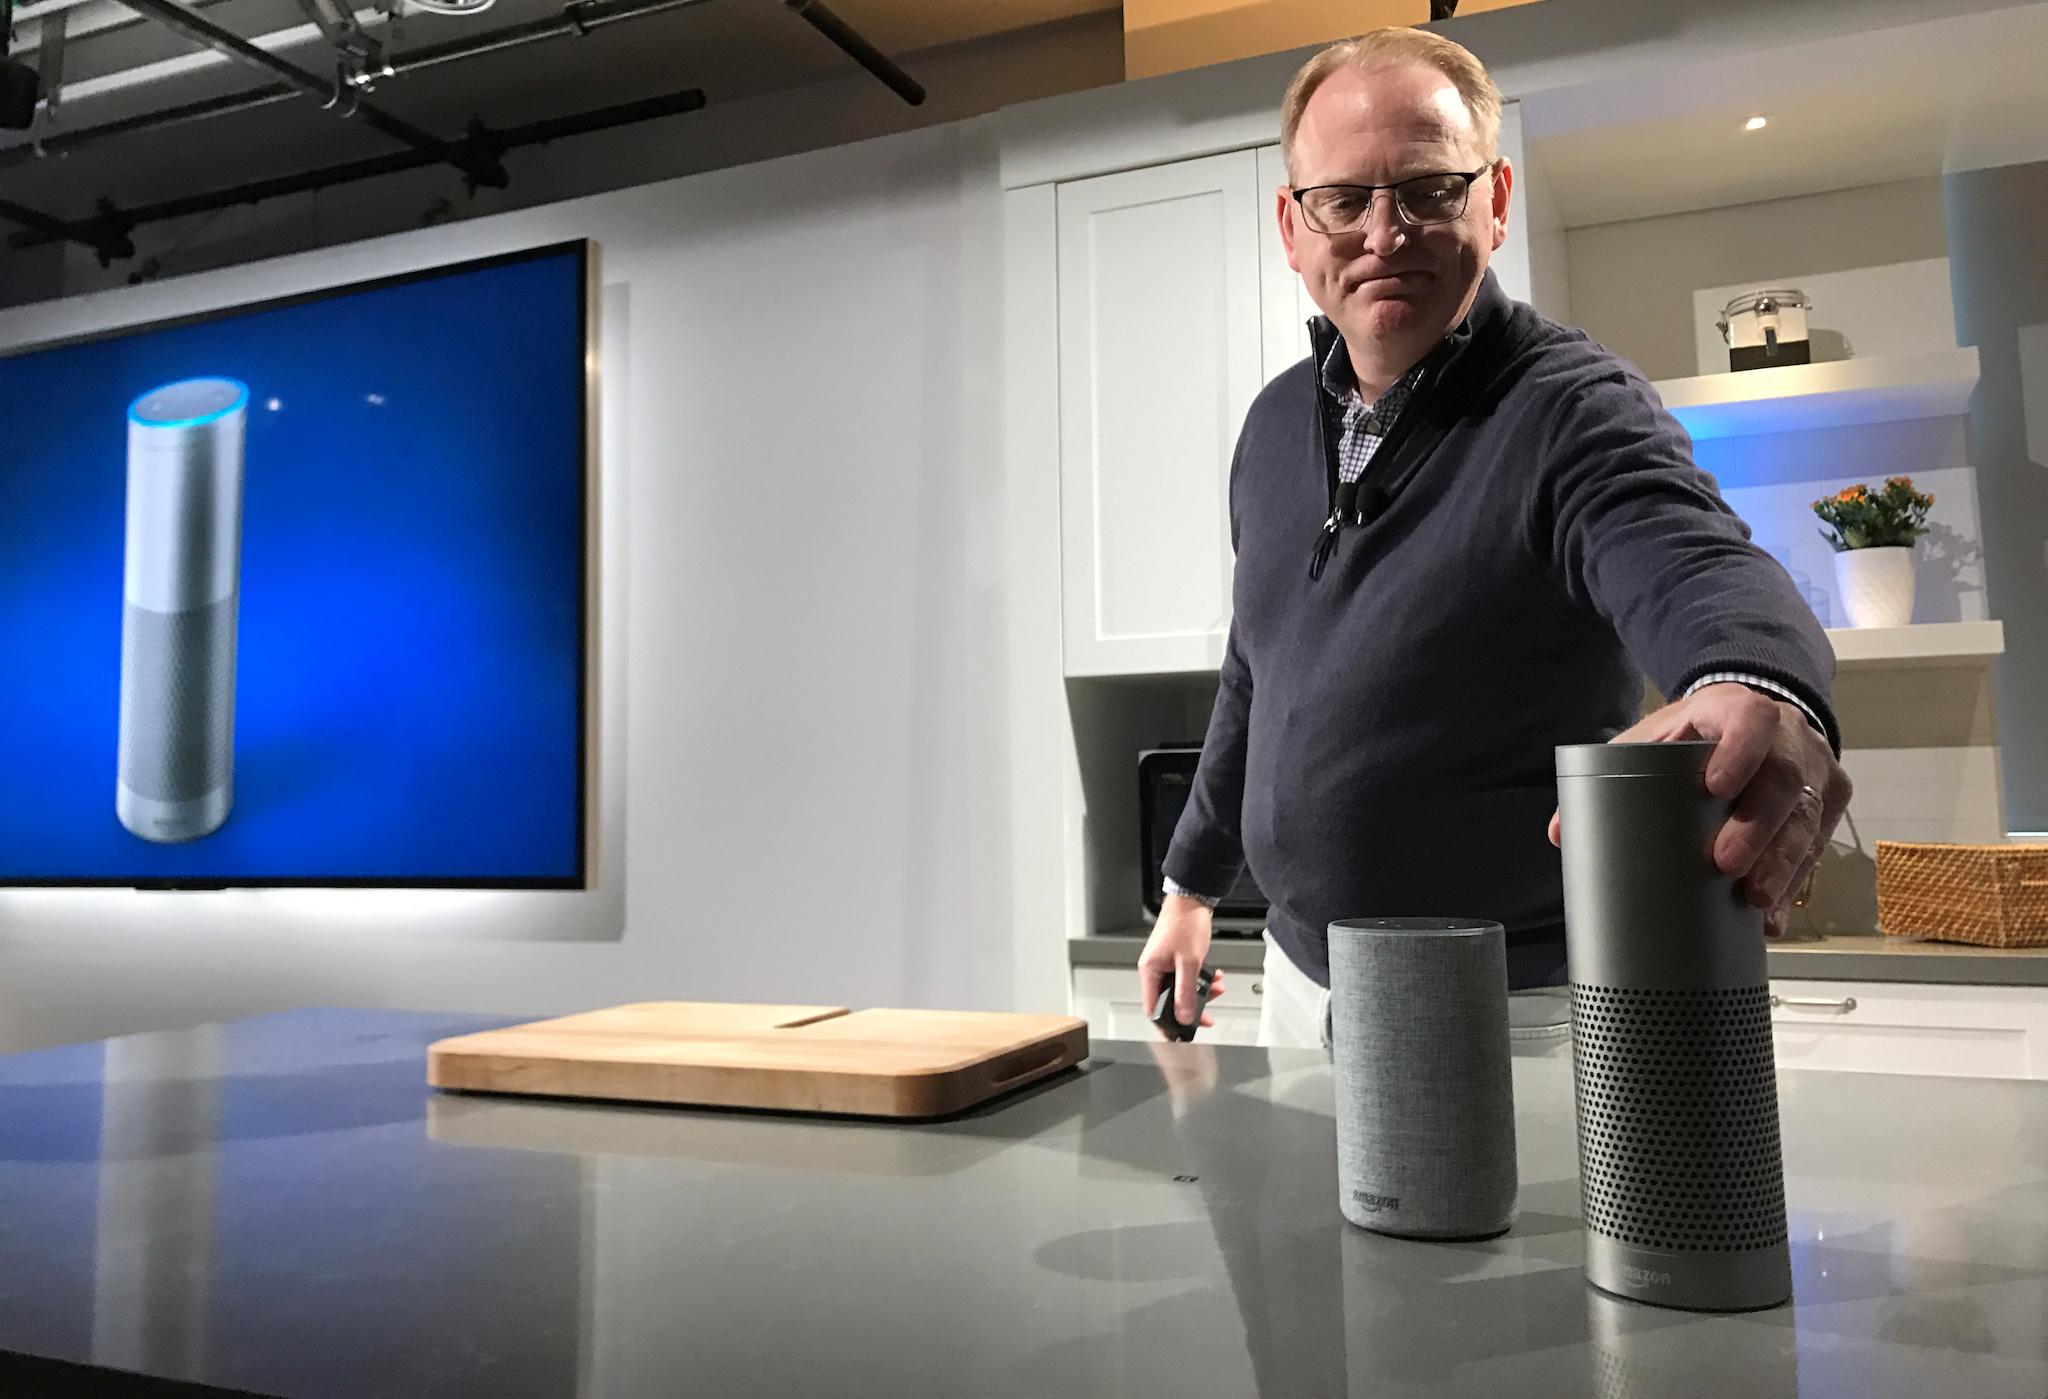 Amazon’s senior vice president David Limp with the voice-controlled Echo